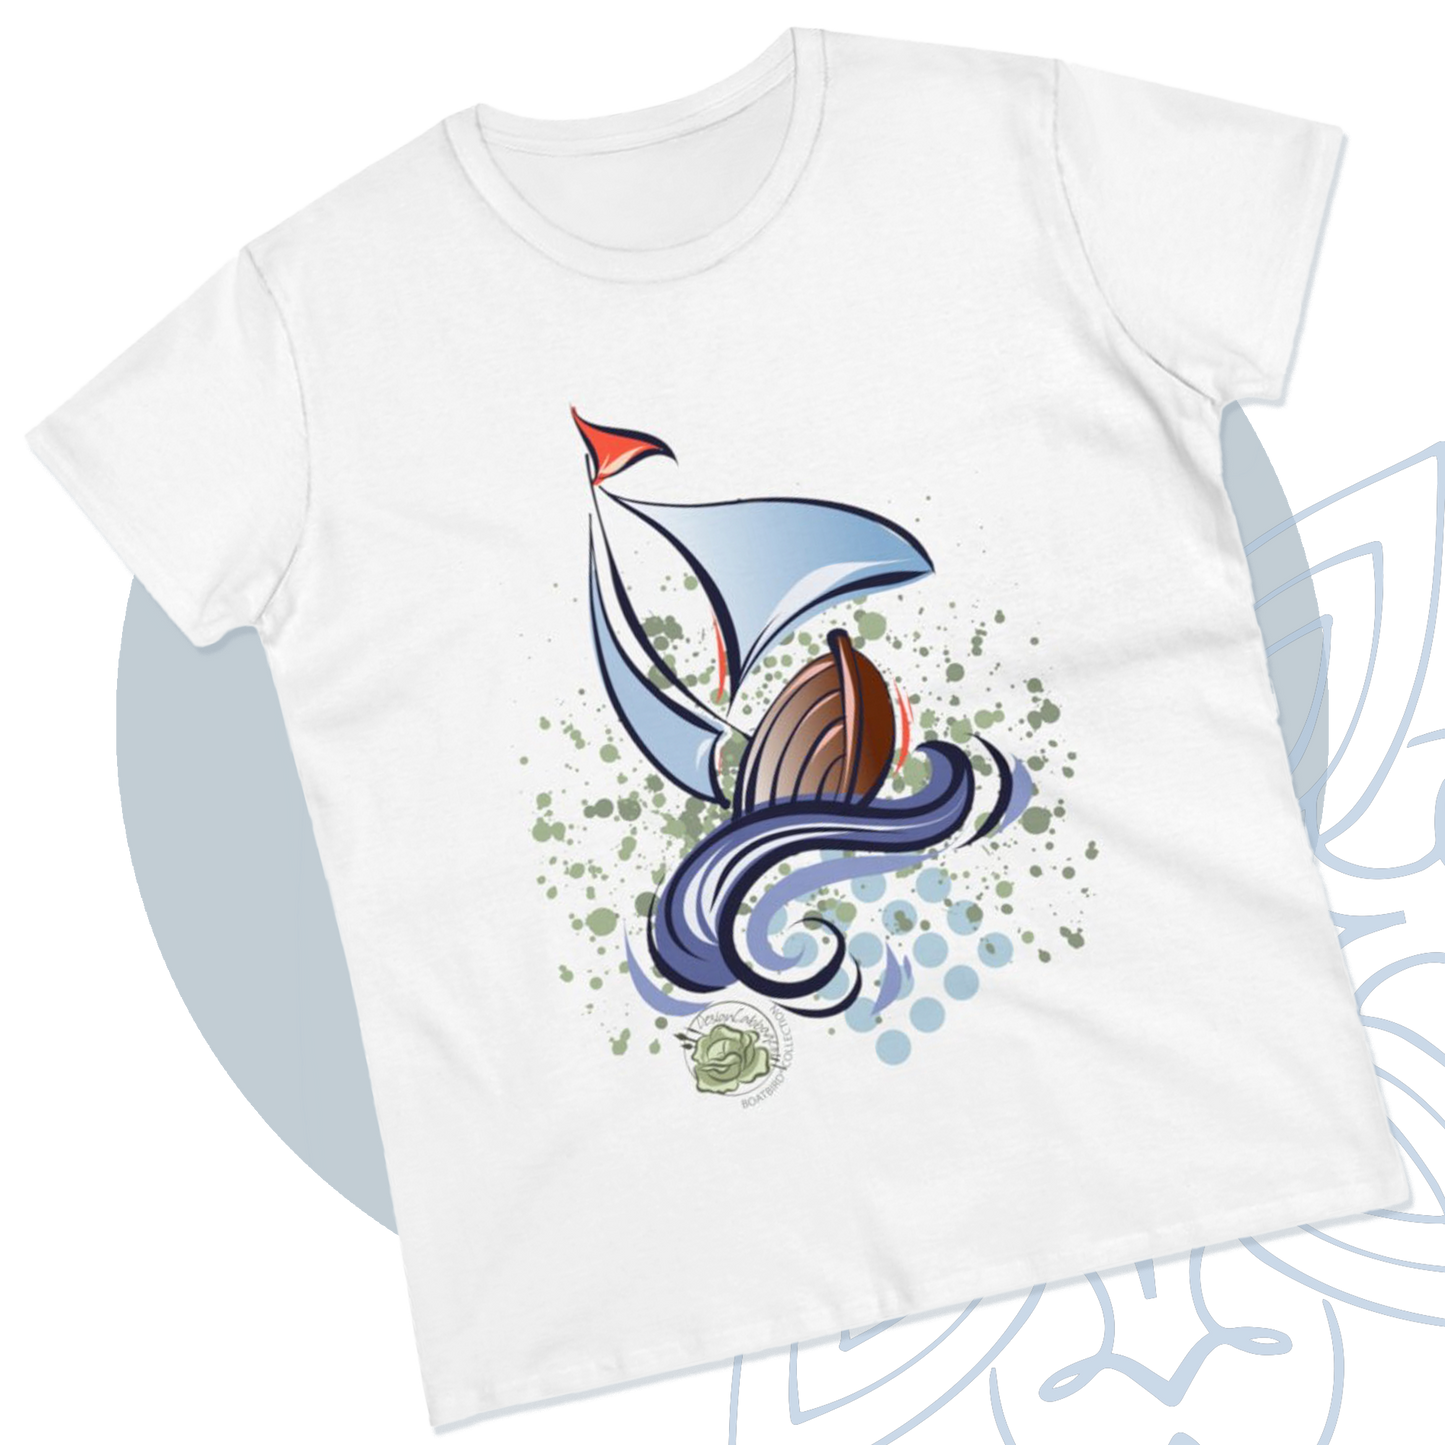 Sailboat Graphic T-Shirt - BoatBird® Collection - Women's Tee